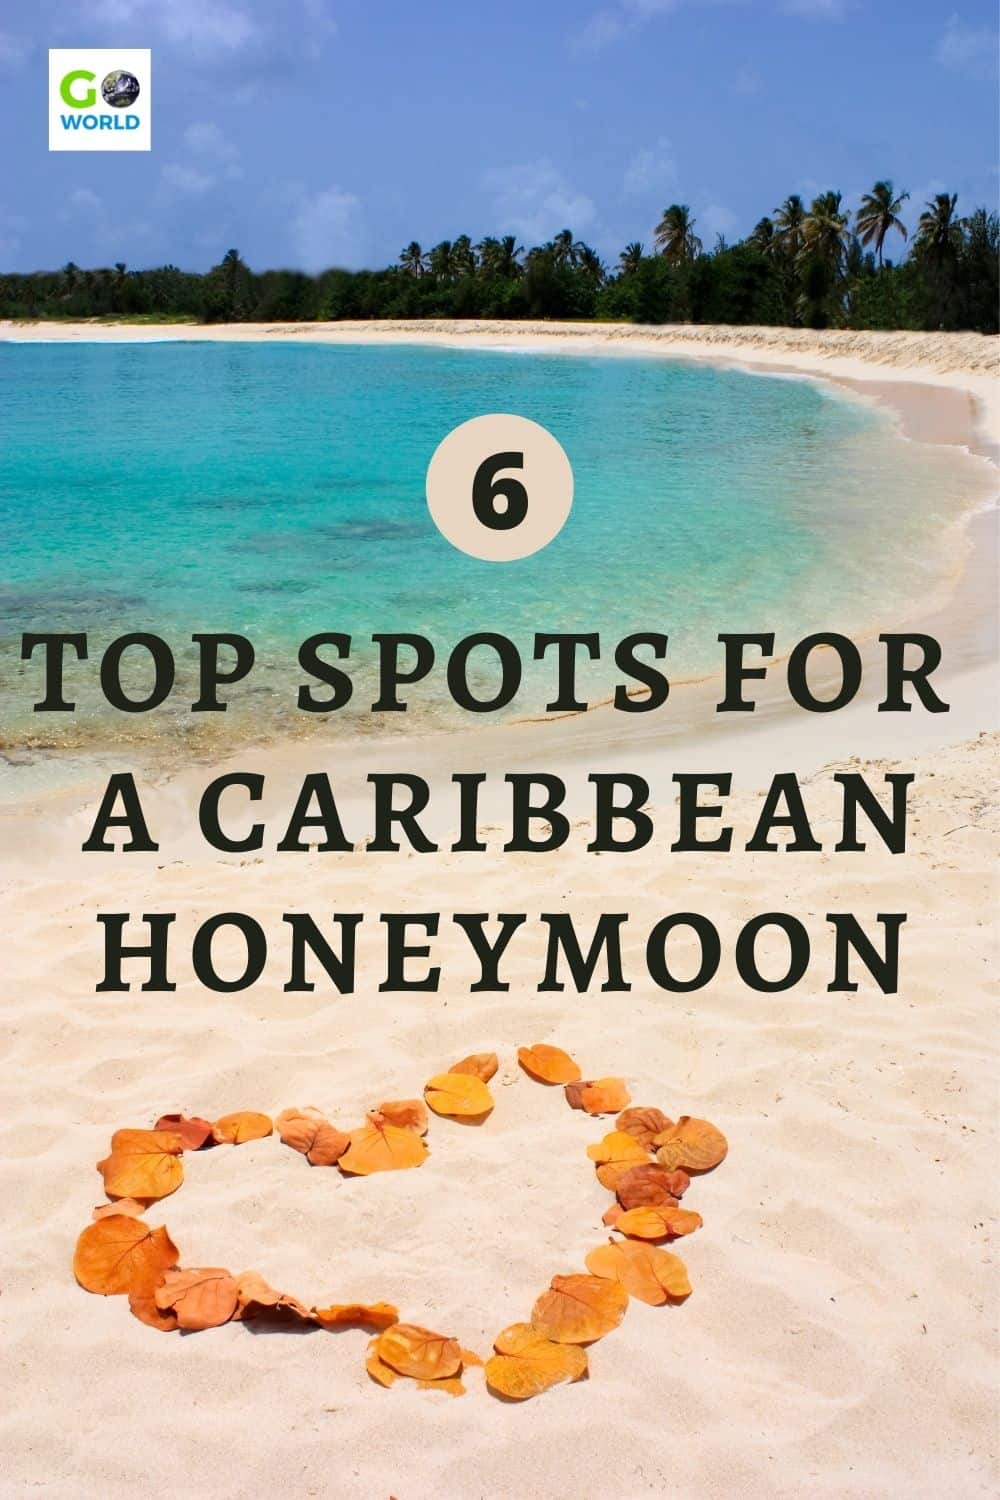 Plan a perfect honeymoon in the Caribbean with these 6 top gorgeous destinations for a romantic couples getaway on a tropical island. #honeymoondestinations #caribbeanislands #romanticdestinations